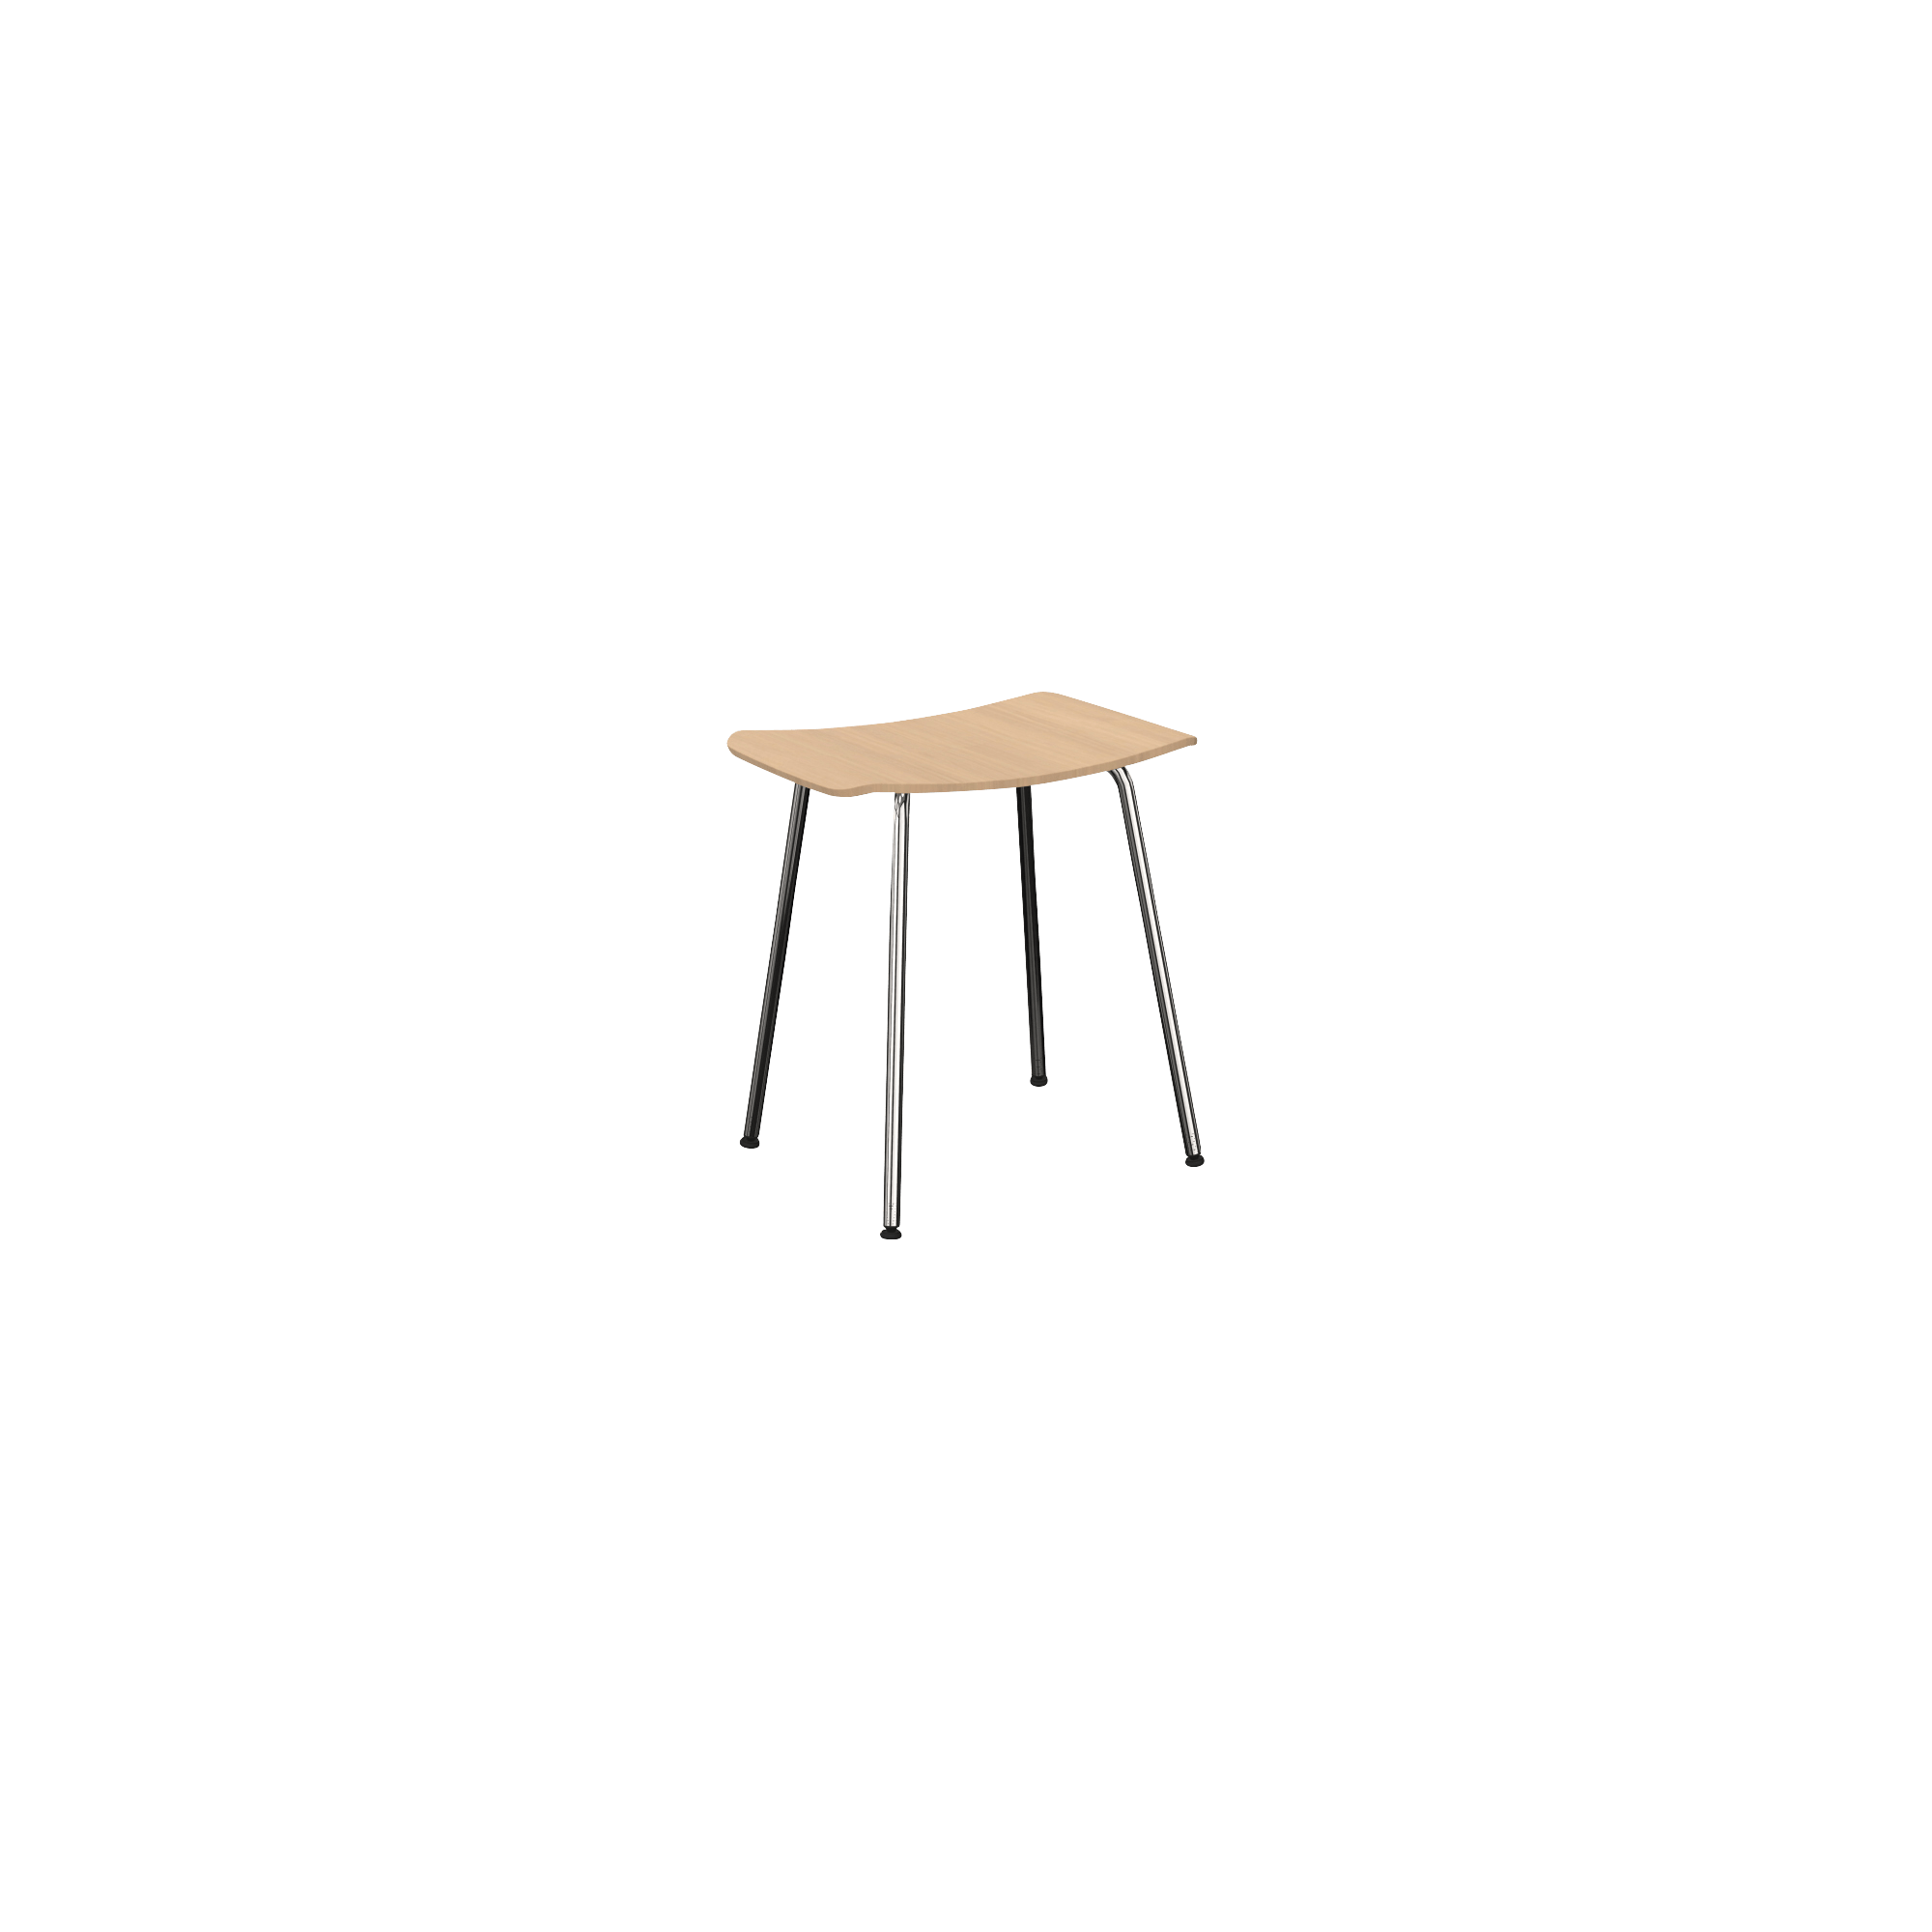 stool with wooden seat and metal legs